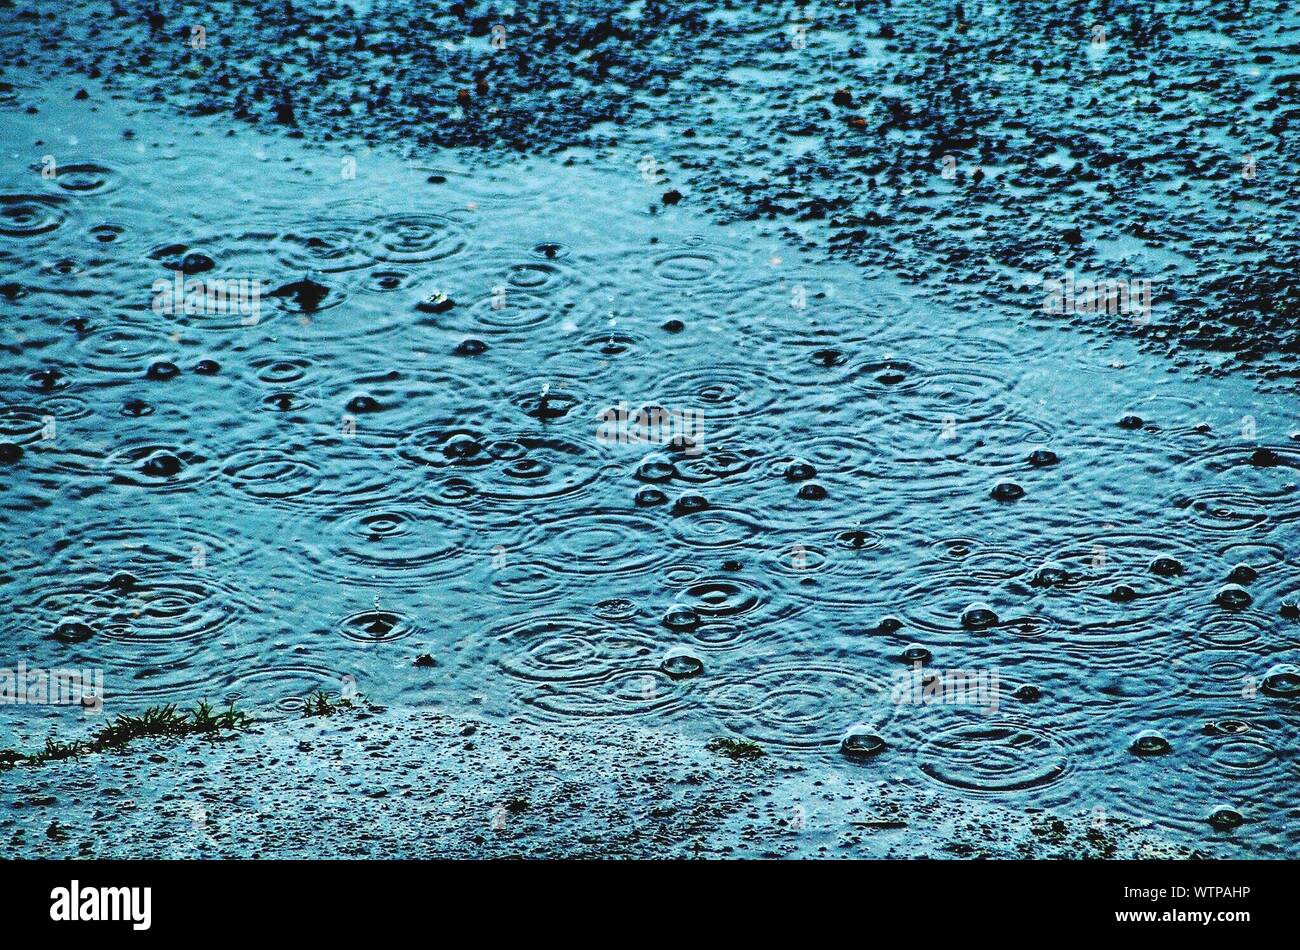 Raindrops Falling In Puddle Stock Photo